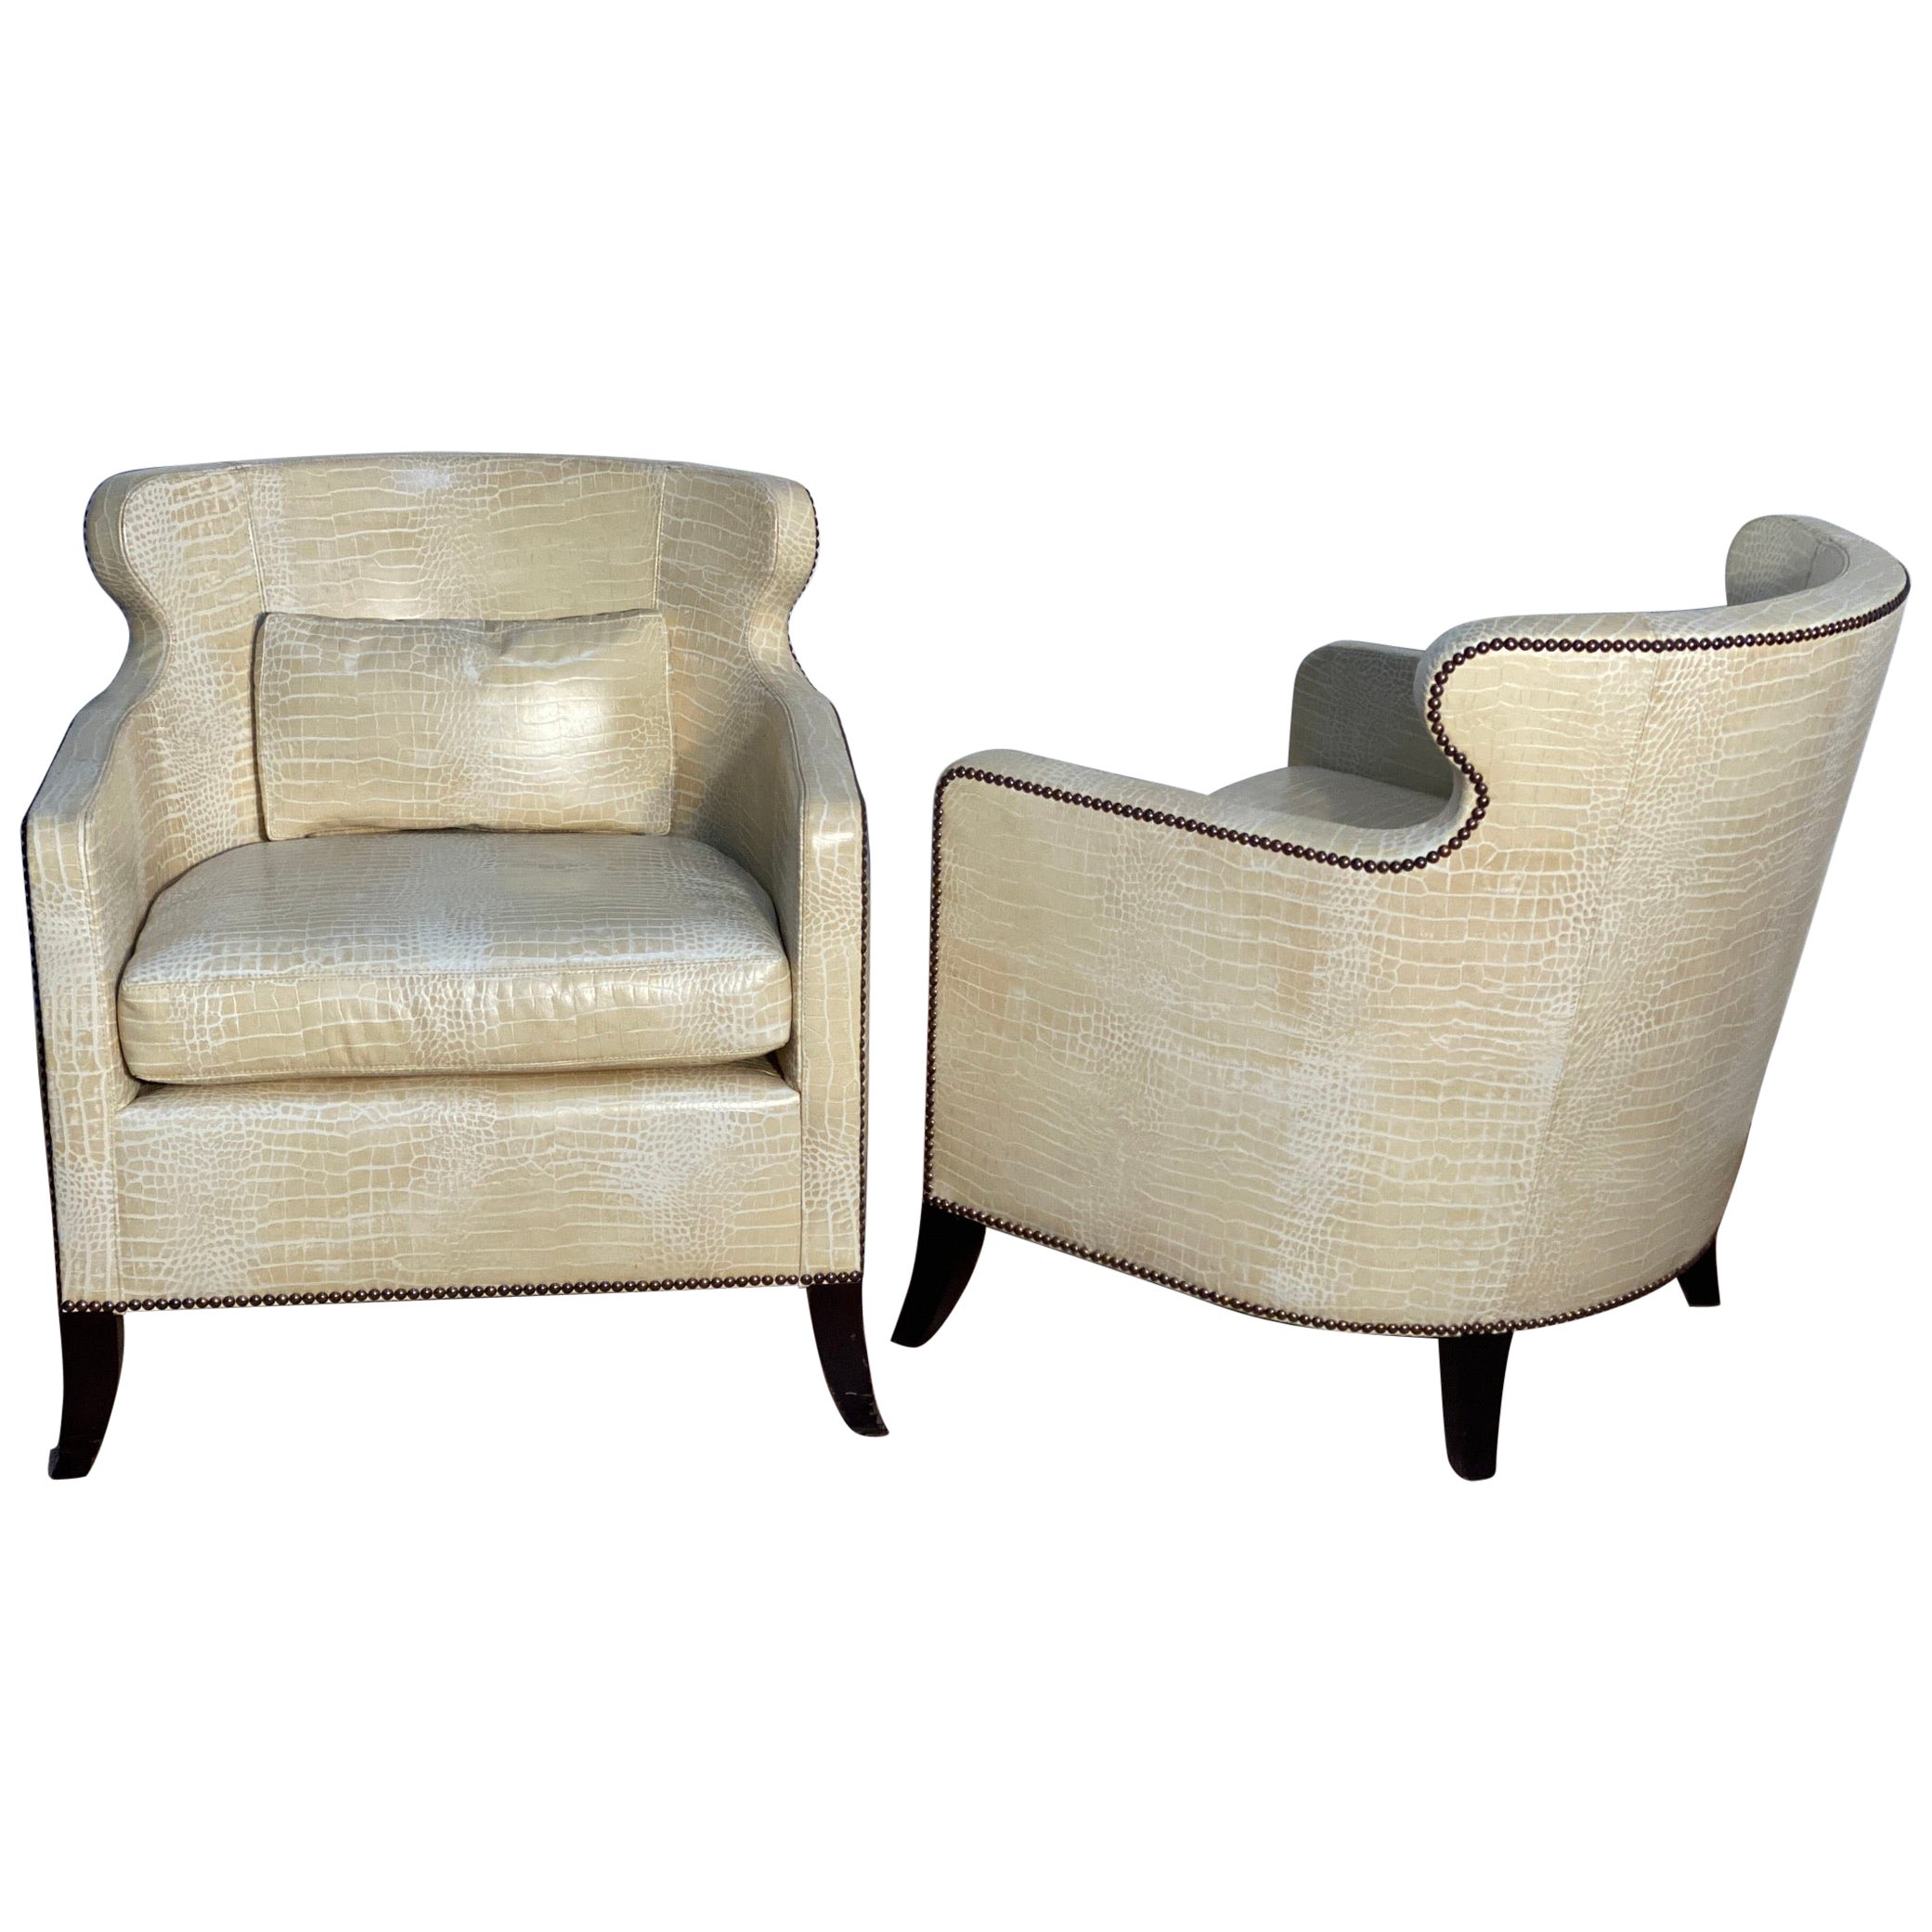 "Tuktu", Pair of Chairs by Ironies, in Faux Alligator-Print Leather